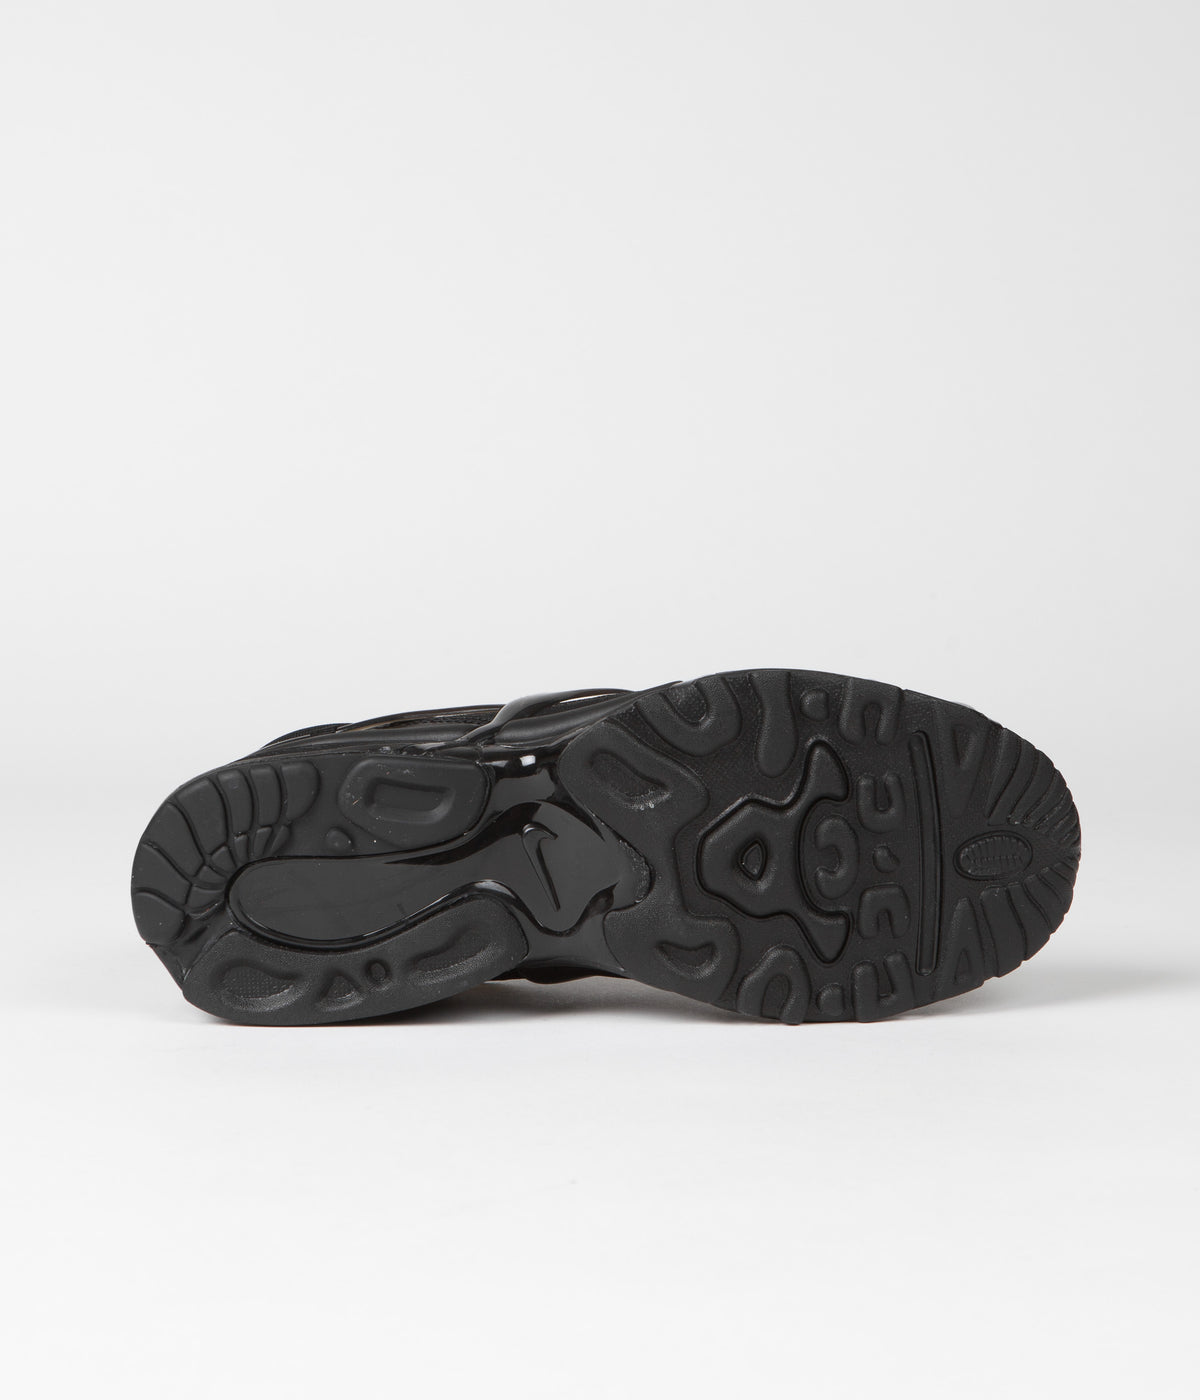 Nike Air Kukini Shoes - Black / Anthracite - Black | Always in Colour